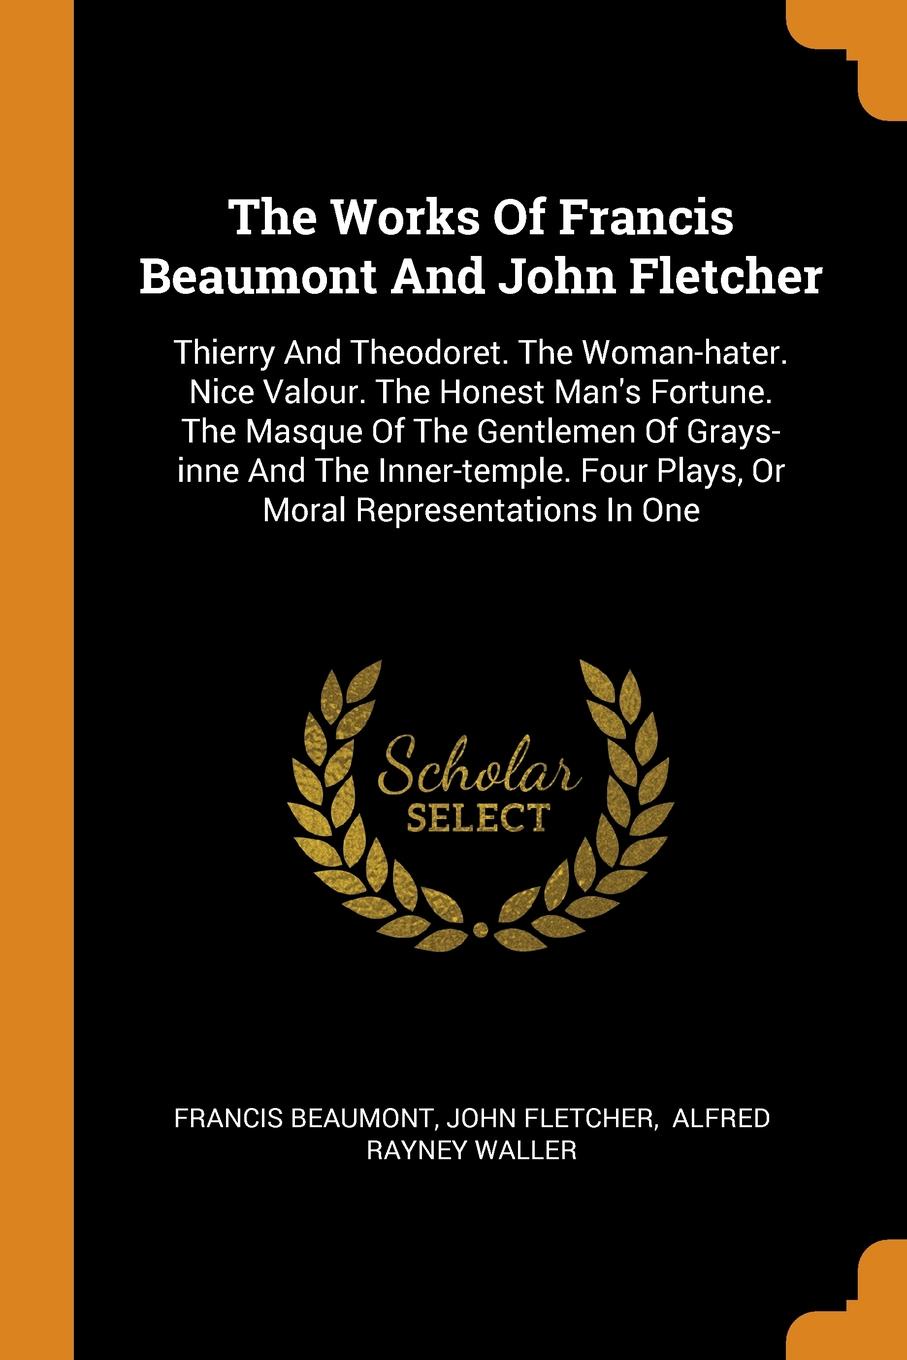 The Works Of Francis Beaumont And John Fletcher. Thierry And Theodoret. The Woman-hater. Nice Valour. The Honest Man.s Fortune. The Masque Of The Gentlemen Of Grays-inne And The Inner-temple. Four Plays, Or Moral Representations In One